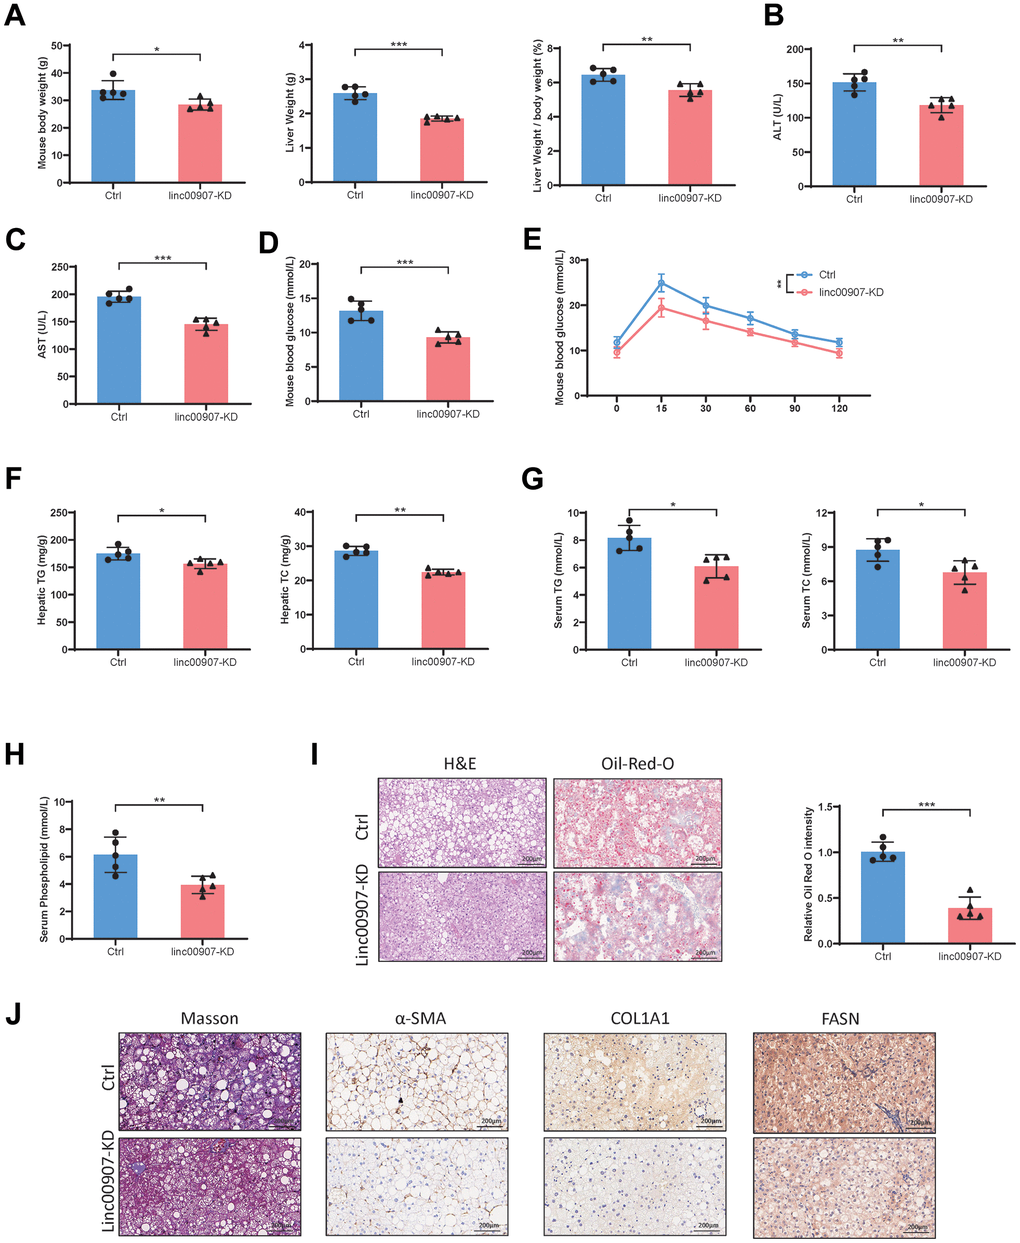 Knockdown of linc00907 alleviates NASH symptoms in HFHC diet mouse model. (A) Linc00907 knockdown results in lower body and liver weights, with a reduced liver/body weight ratio; (B) linc00907 knockdown leads to a reduction in serum ALT levels in mice; (C) linc00907 knockdown leads to a reduction in serum AST levels in mice; (D) mice in the knockdown group displayed lower blood glucose levels; (E) the OGTT confirmed higher glucose tolerance in linc00907 knockdown mice; (F) total triglyceride and total cholesterol levels in liver were lower in the knockdown group; (G) TG and TC levels in blood were lower in the knockdown group; (H) the serum phospholipid levels were also lower in the knockdown group; (I) H&E and Oil Red O staining of liver tissues; (J) α-SMA, Masson, COL1A1 and FASN staining of liver sections.